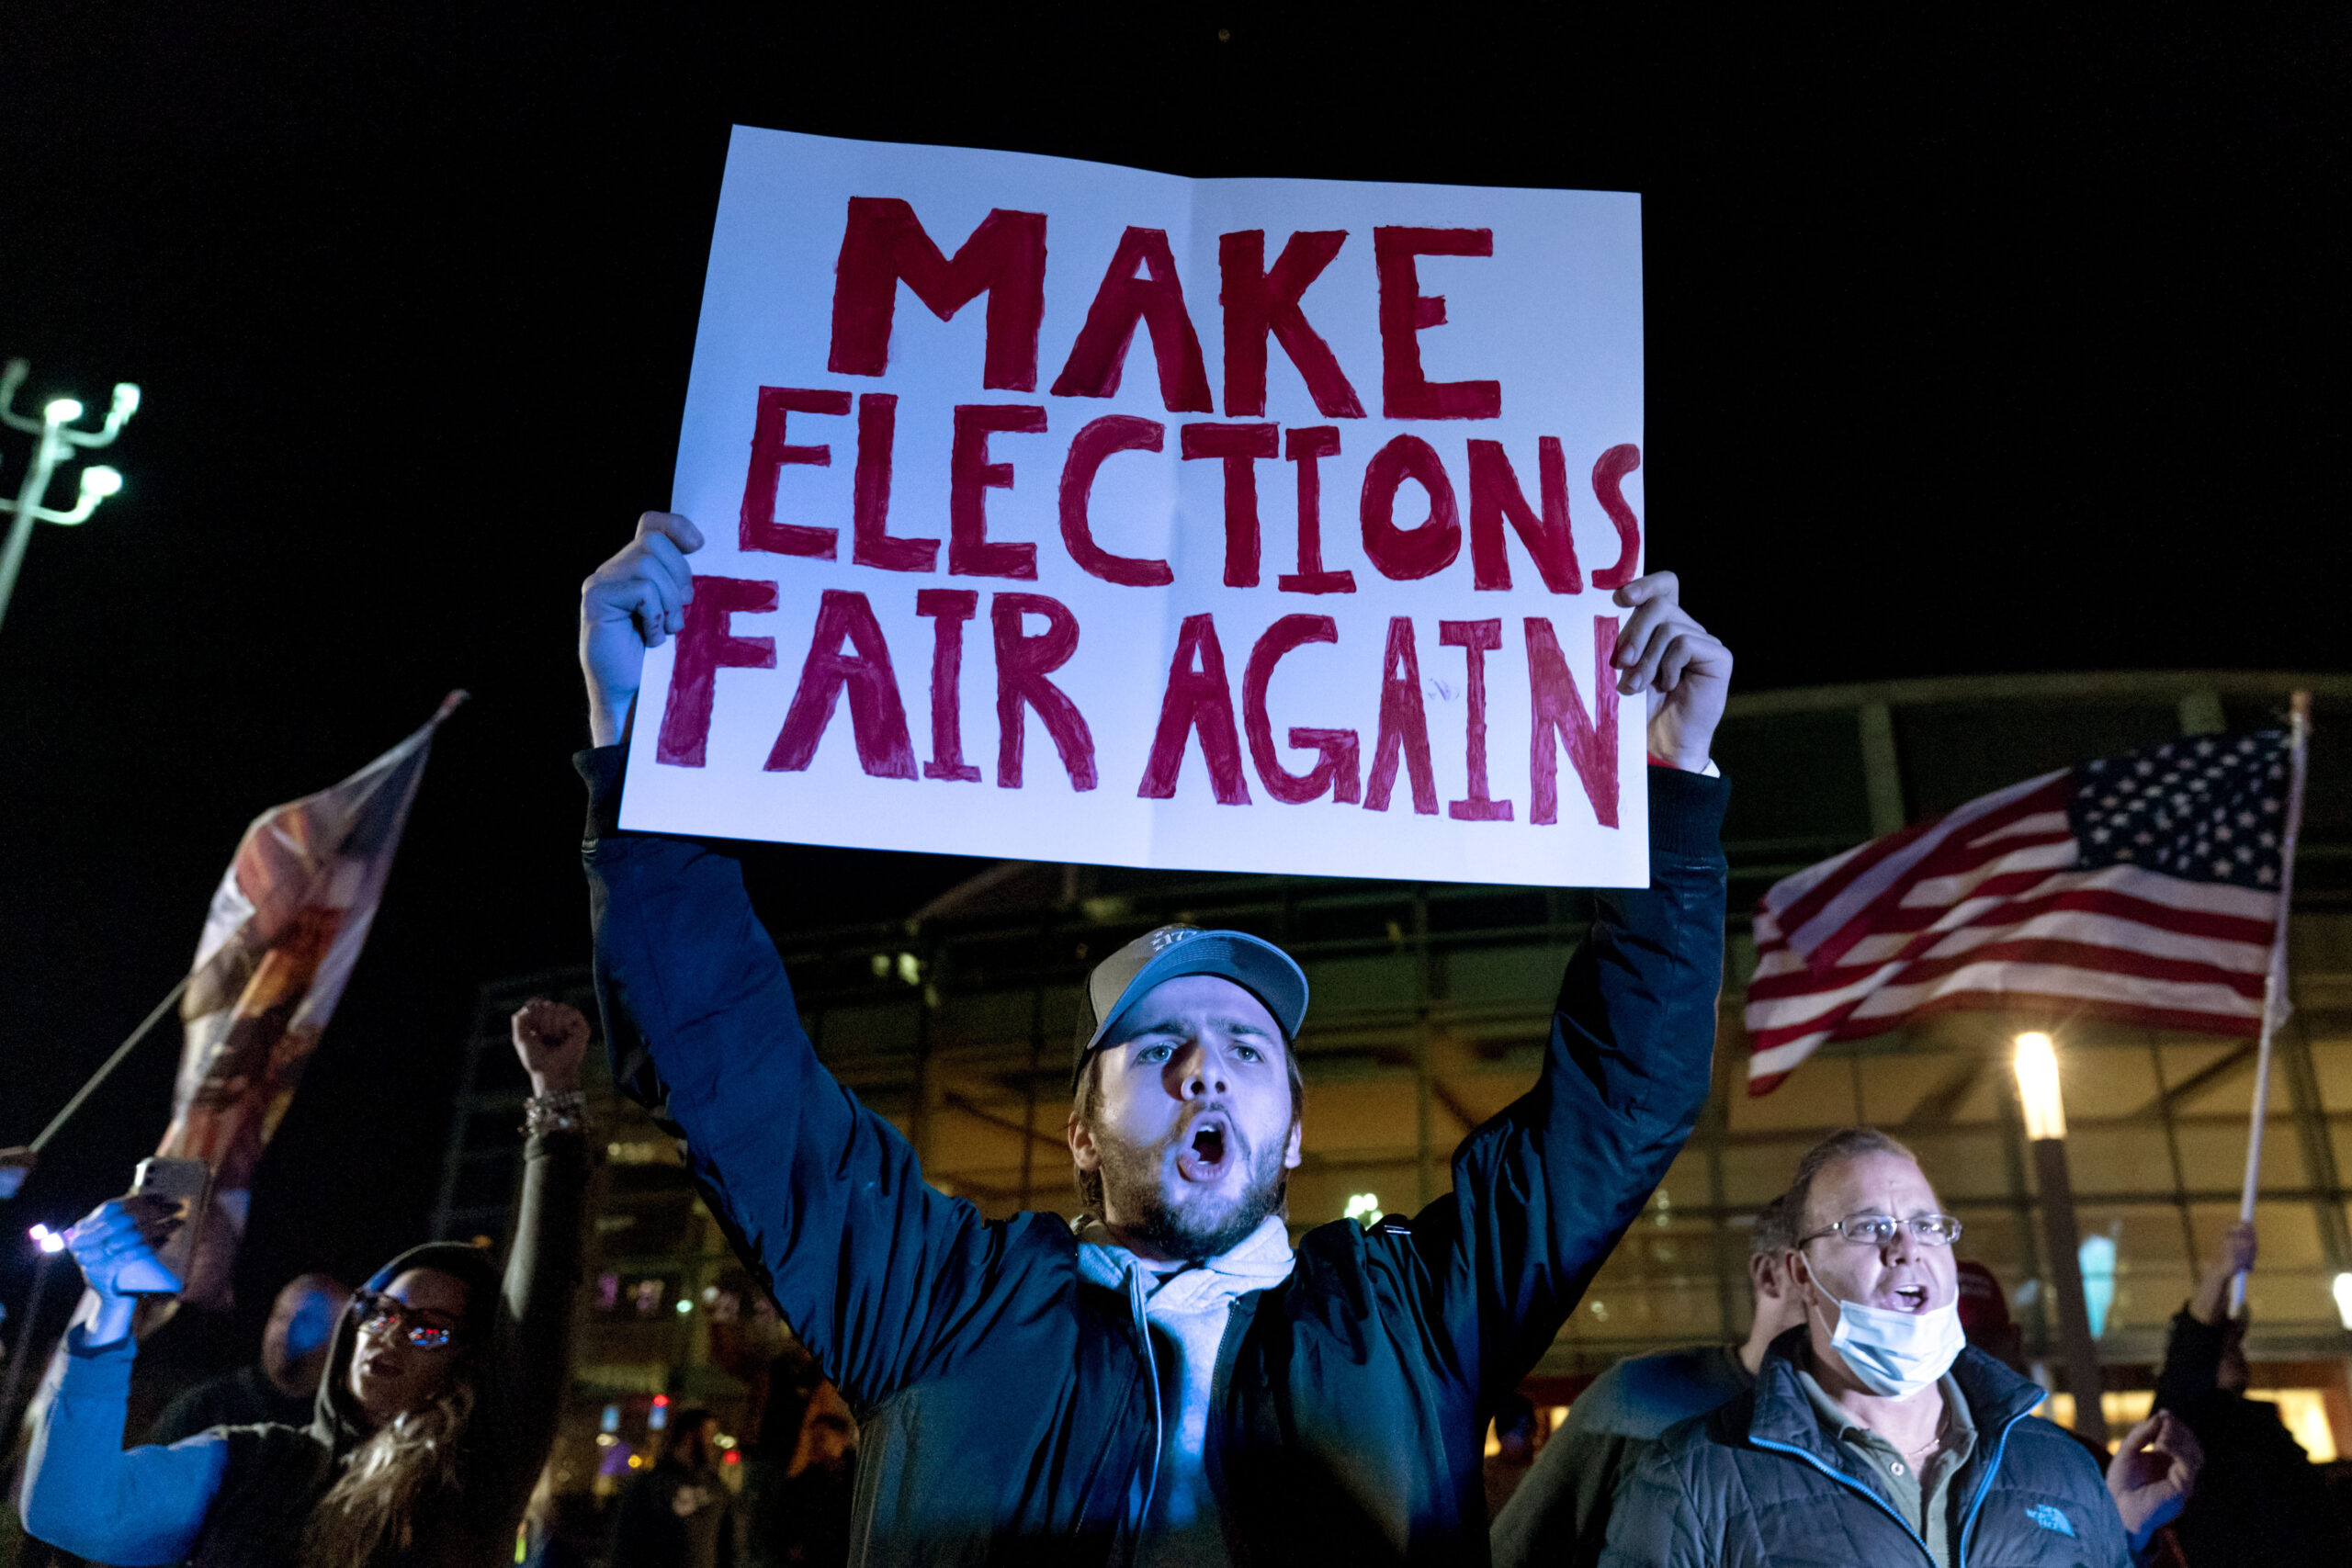 FILE - In this Nov. 5, 2020, file photo, Jake Contos, a supporter of President Donald Trump, chants during a protest against the election results outside the central counting board at the TCF Center in Detroit. President Donald Trump and his allies have fomented the idea of a “rigged election” for months, promoting falsehoods through various media and even lawsuits about fraudulent votes and dead voters casting ballots. While the details of these spurious allegations may fade over time, the scar it leaves on American democracy could take years to heal. (AP Photo/David Goldman, File)